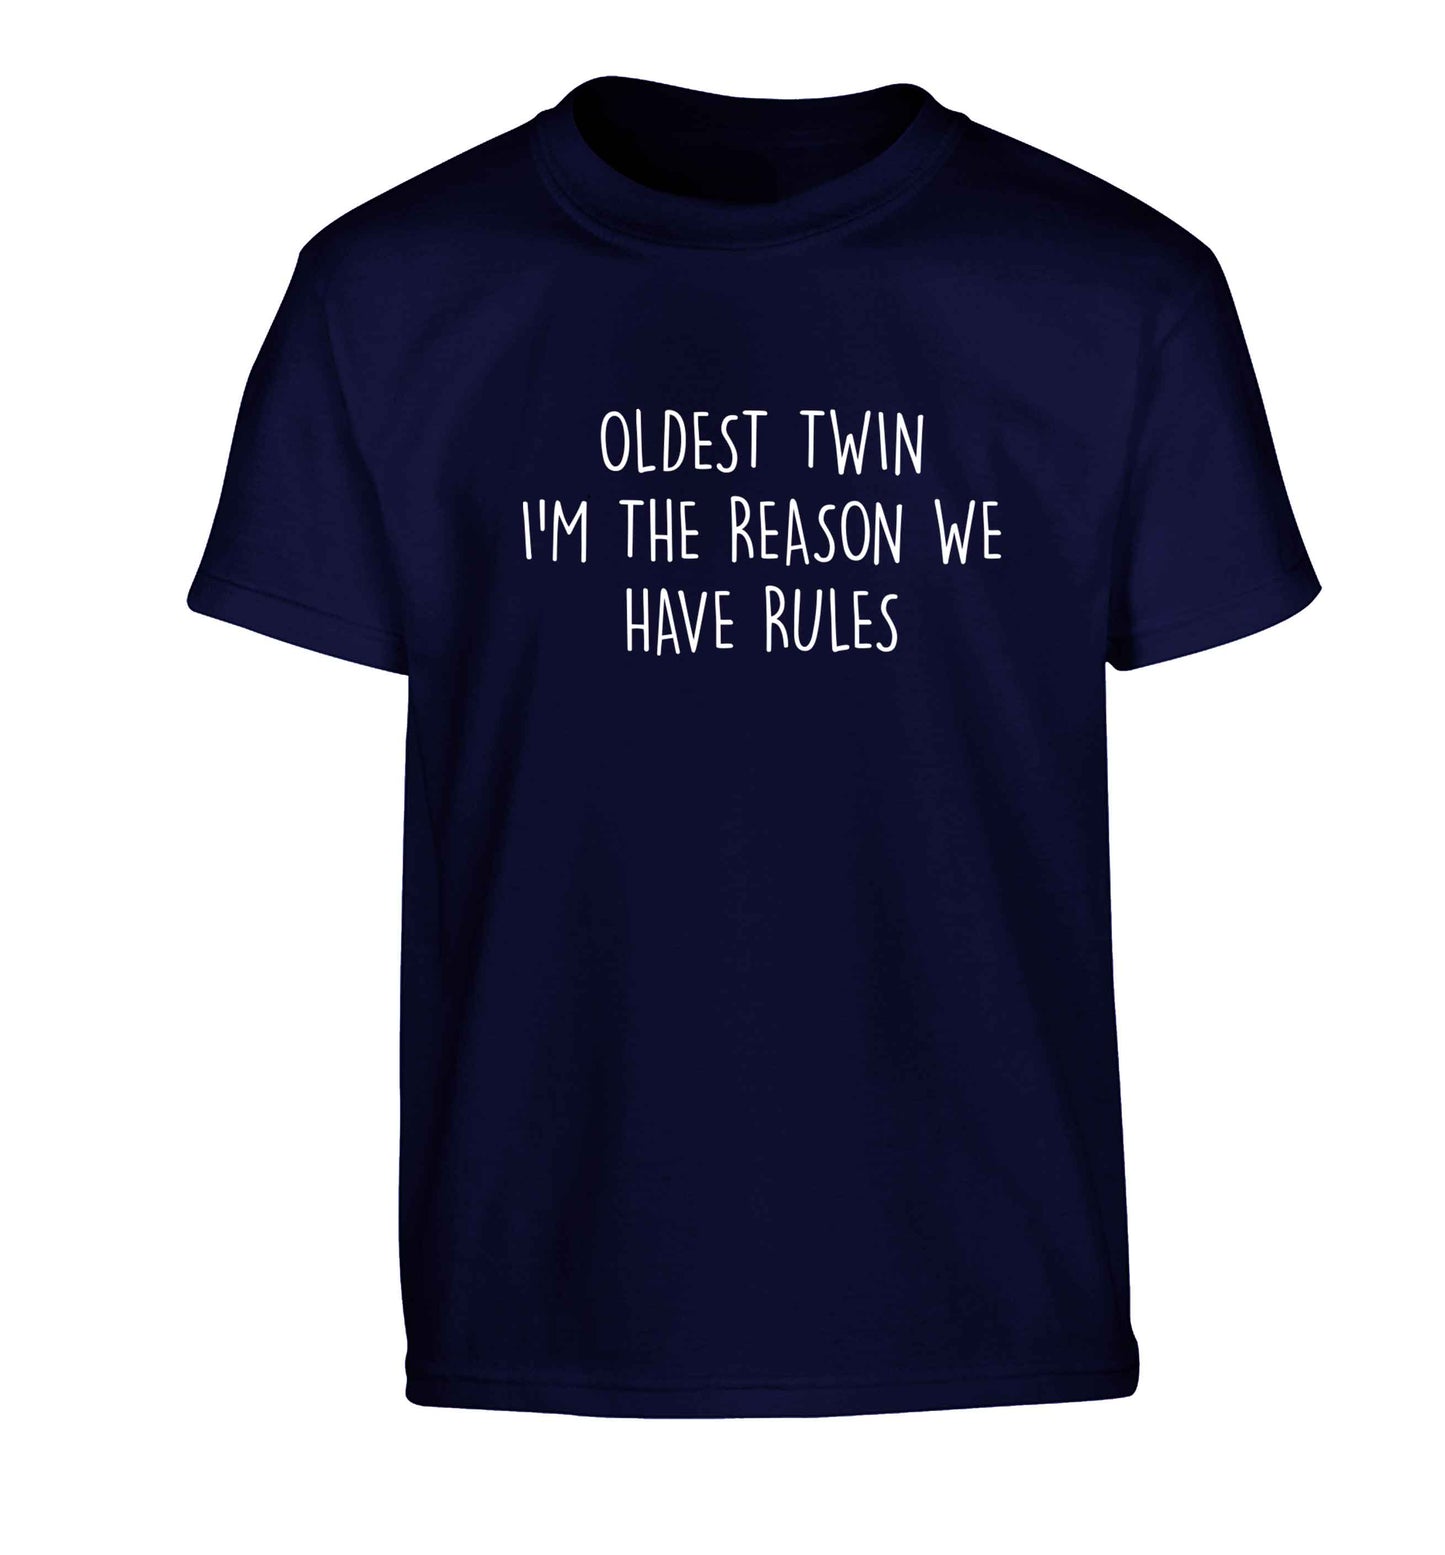 Oldest twin I'm the reason we have rules Children's navy Tshirt 12-13 Years